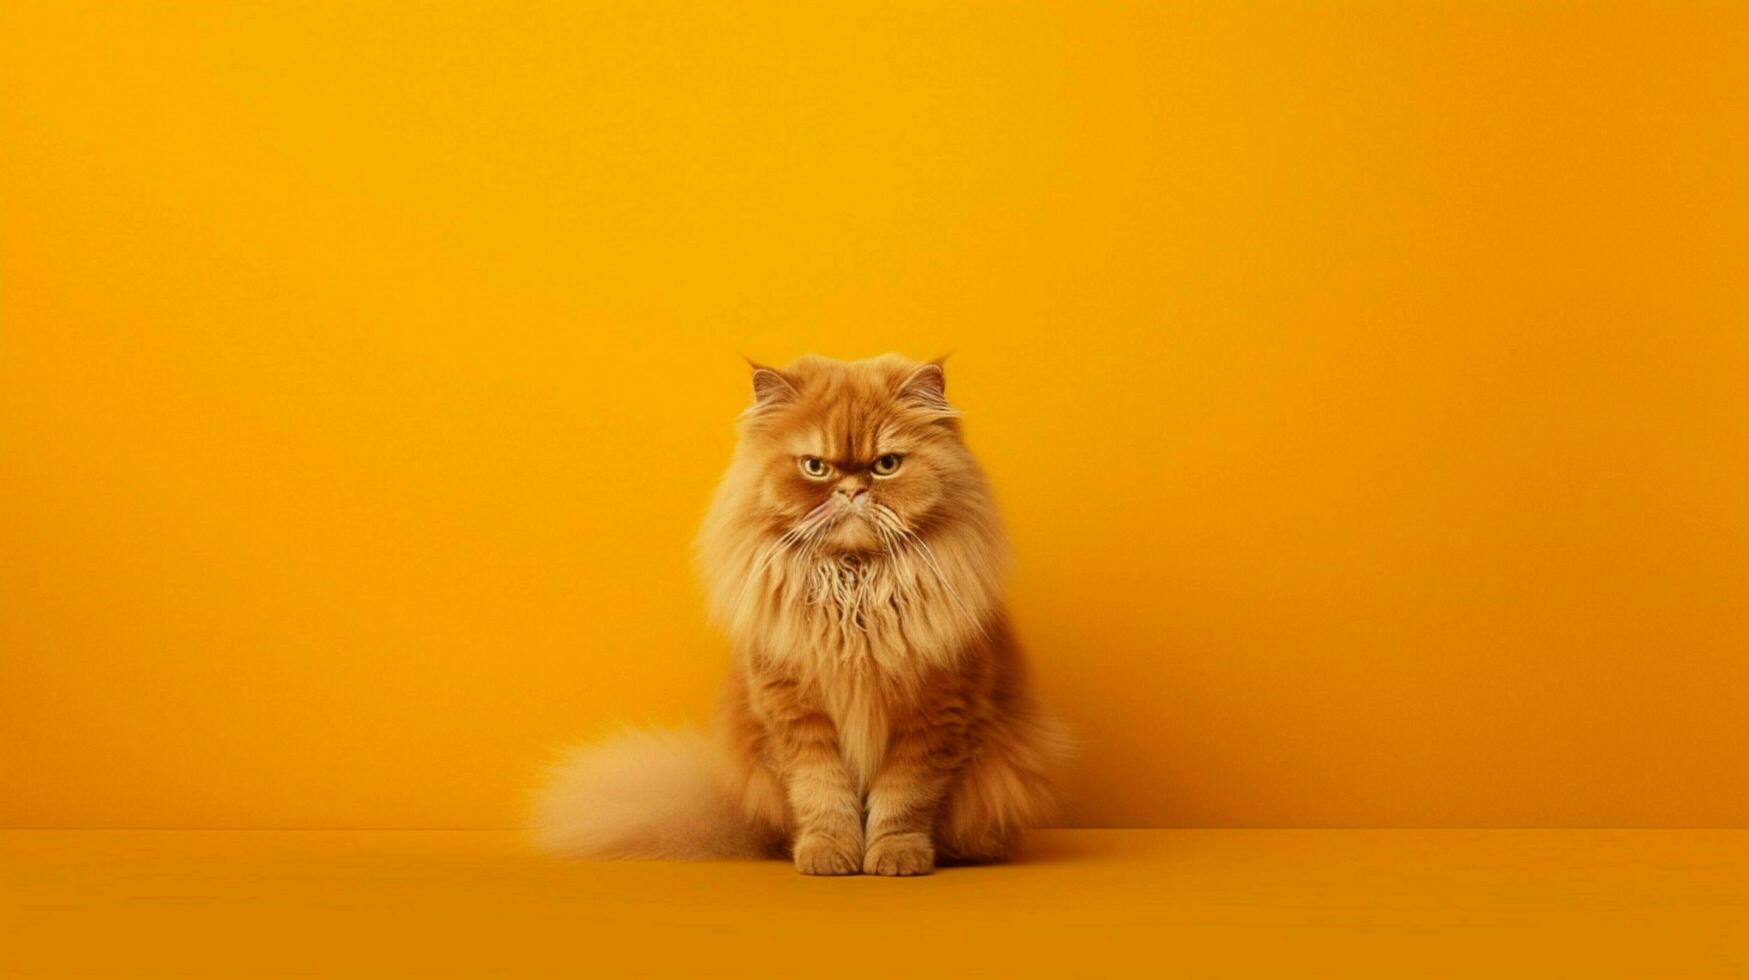 a fluffy orange cat sits on a yellow background photo